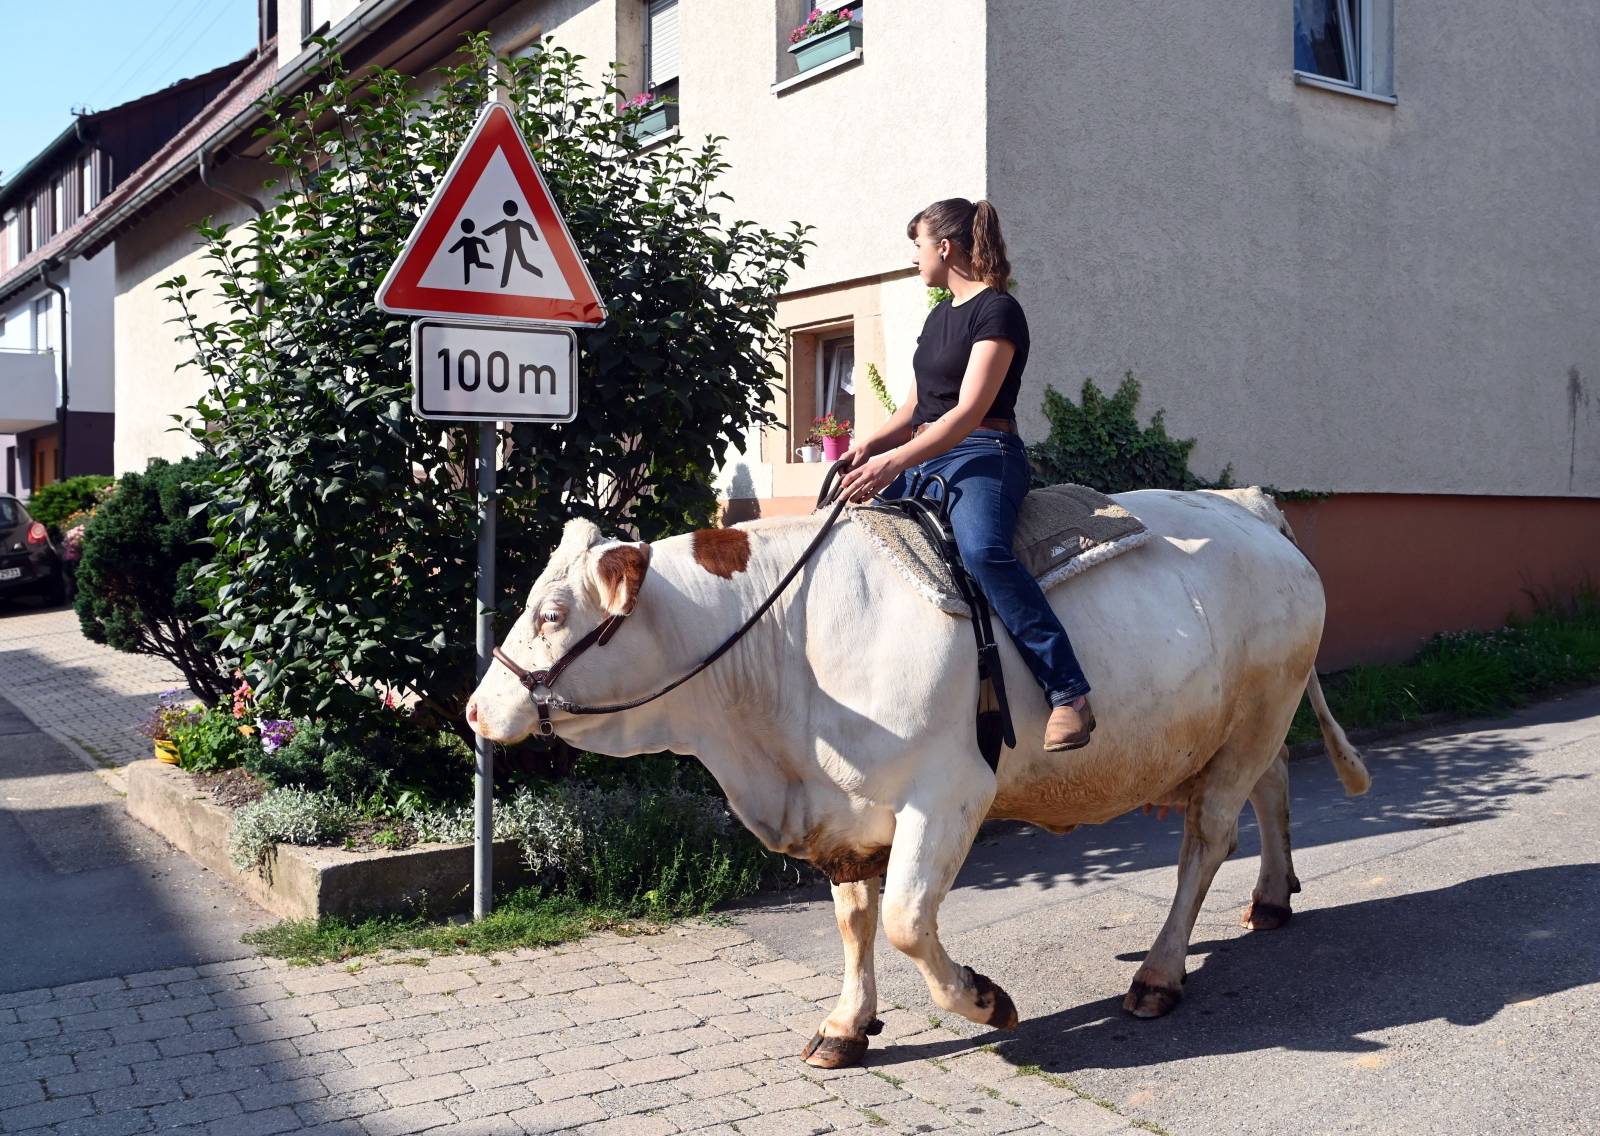 Mounted cow